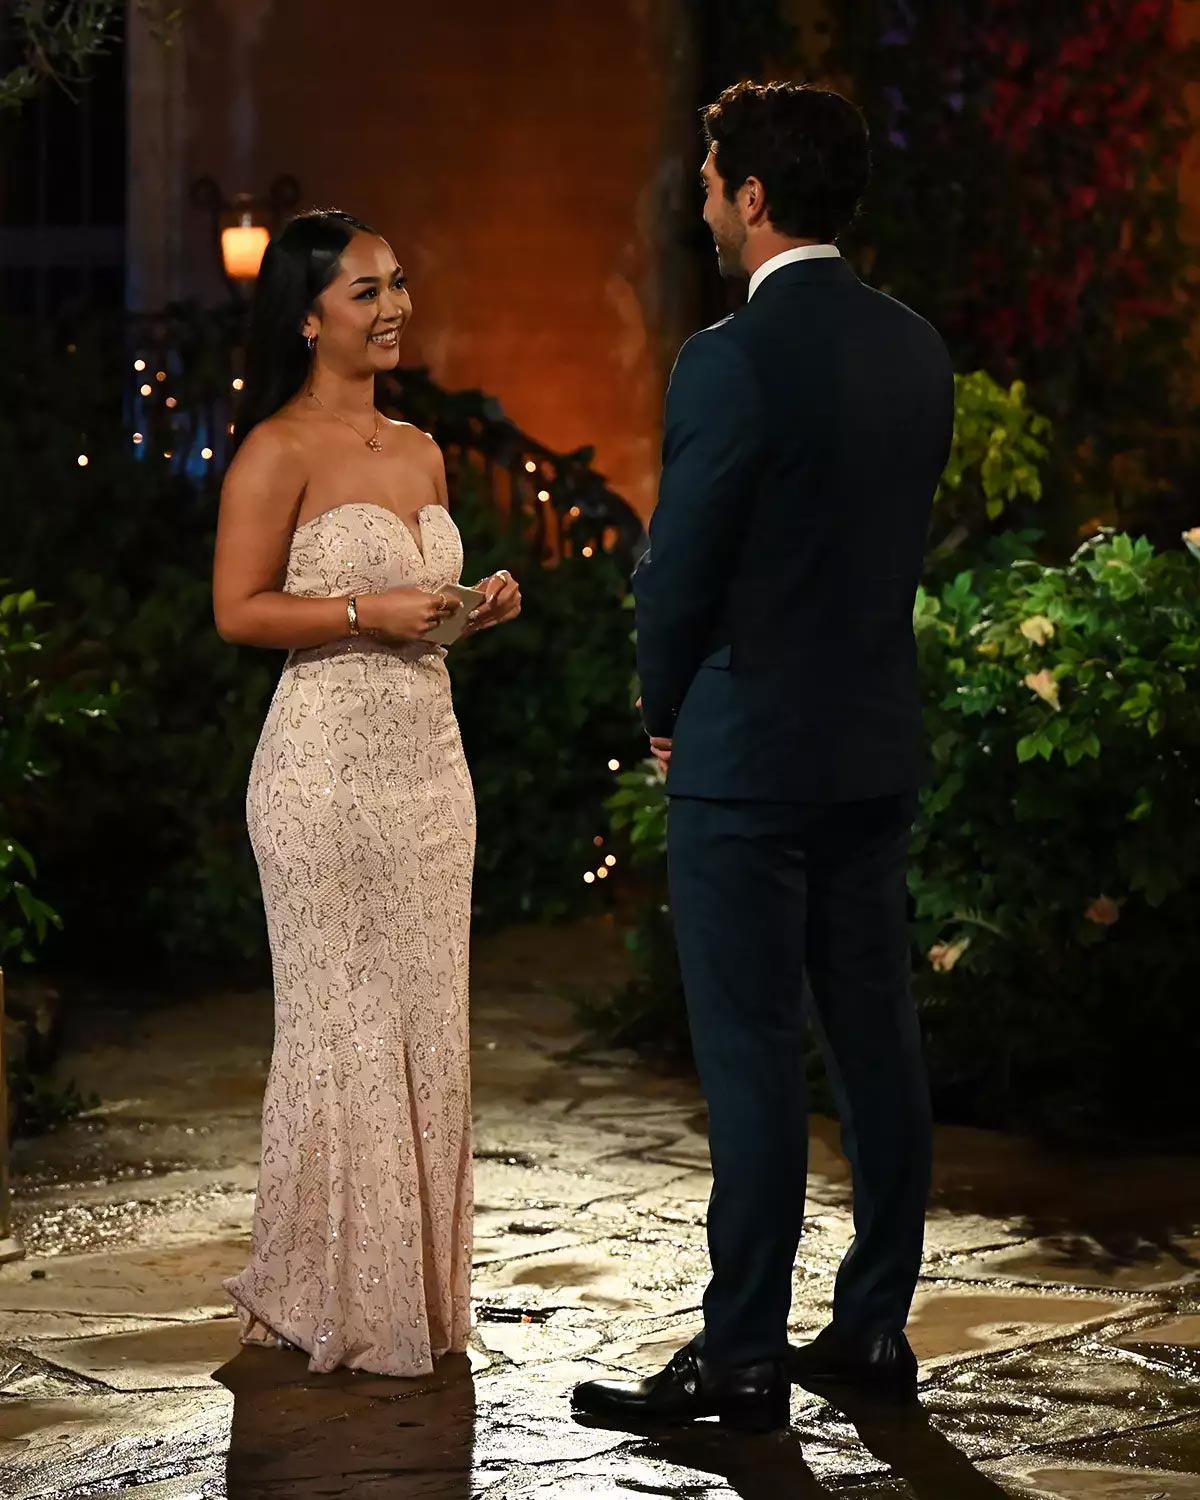 Joey Graziadei gave first impression rose to Leas after she burned her advantage card on The Bachelor premeire night